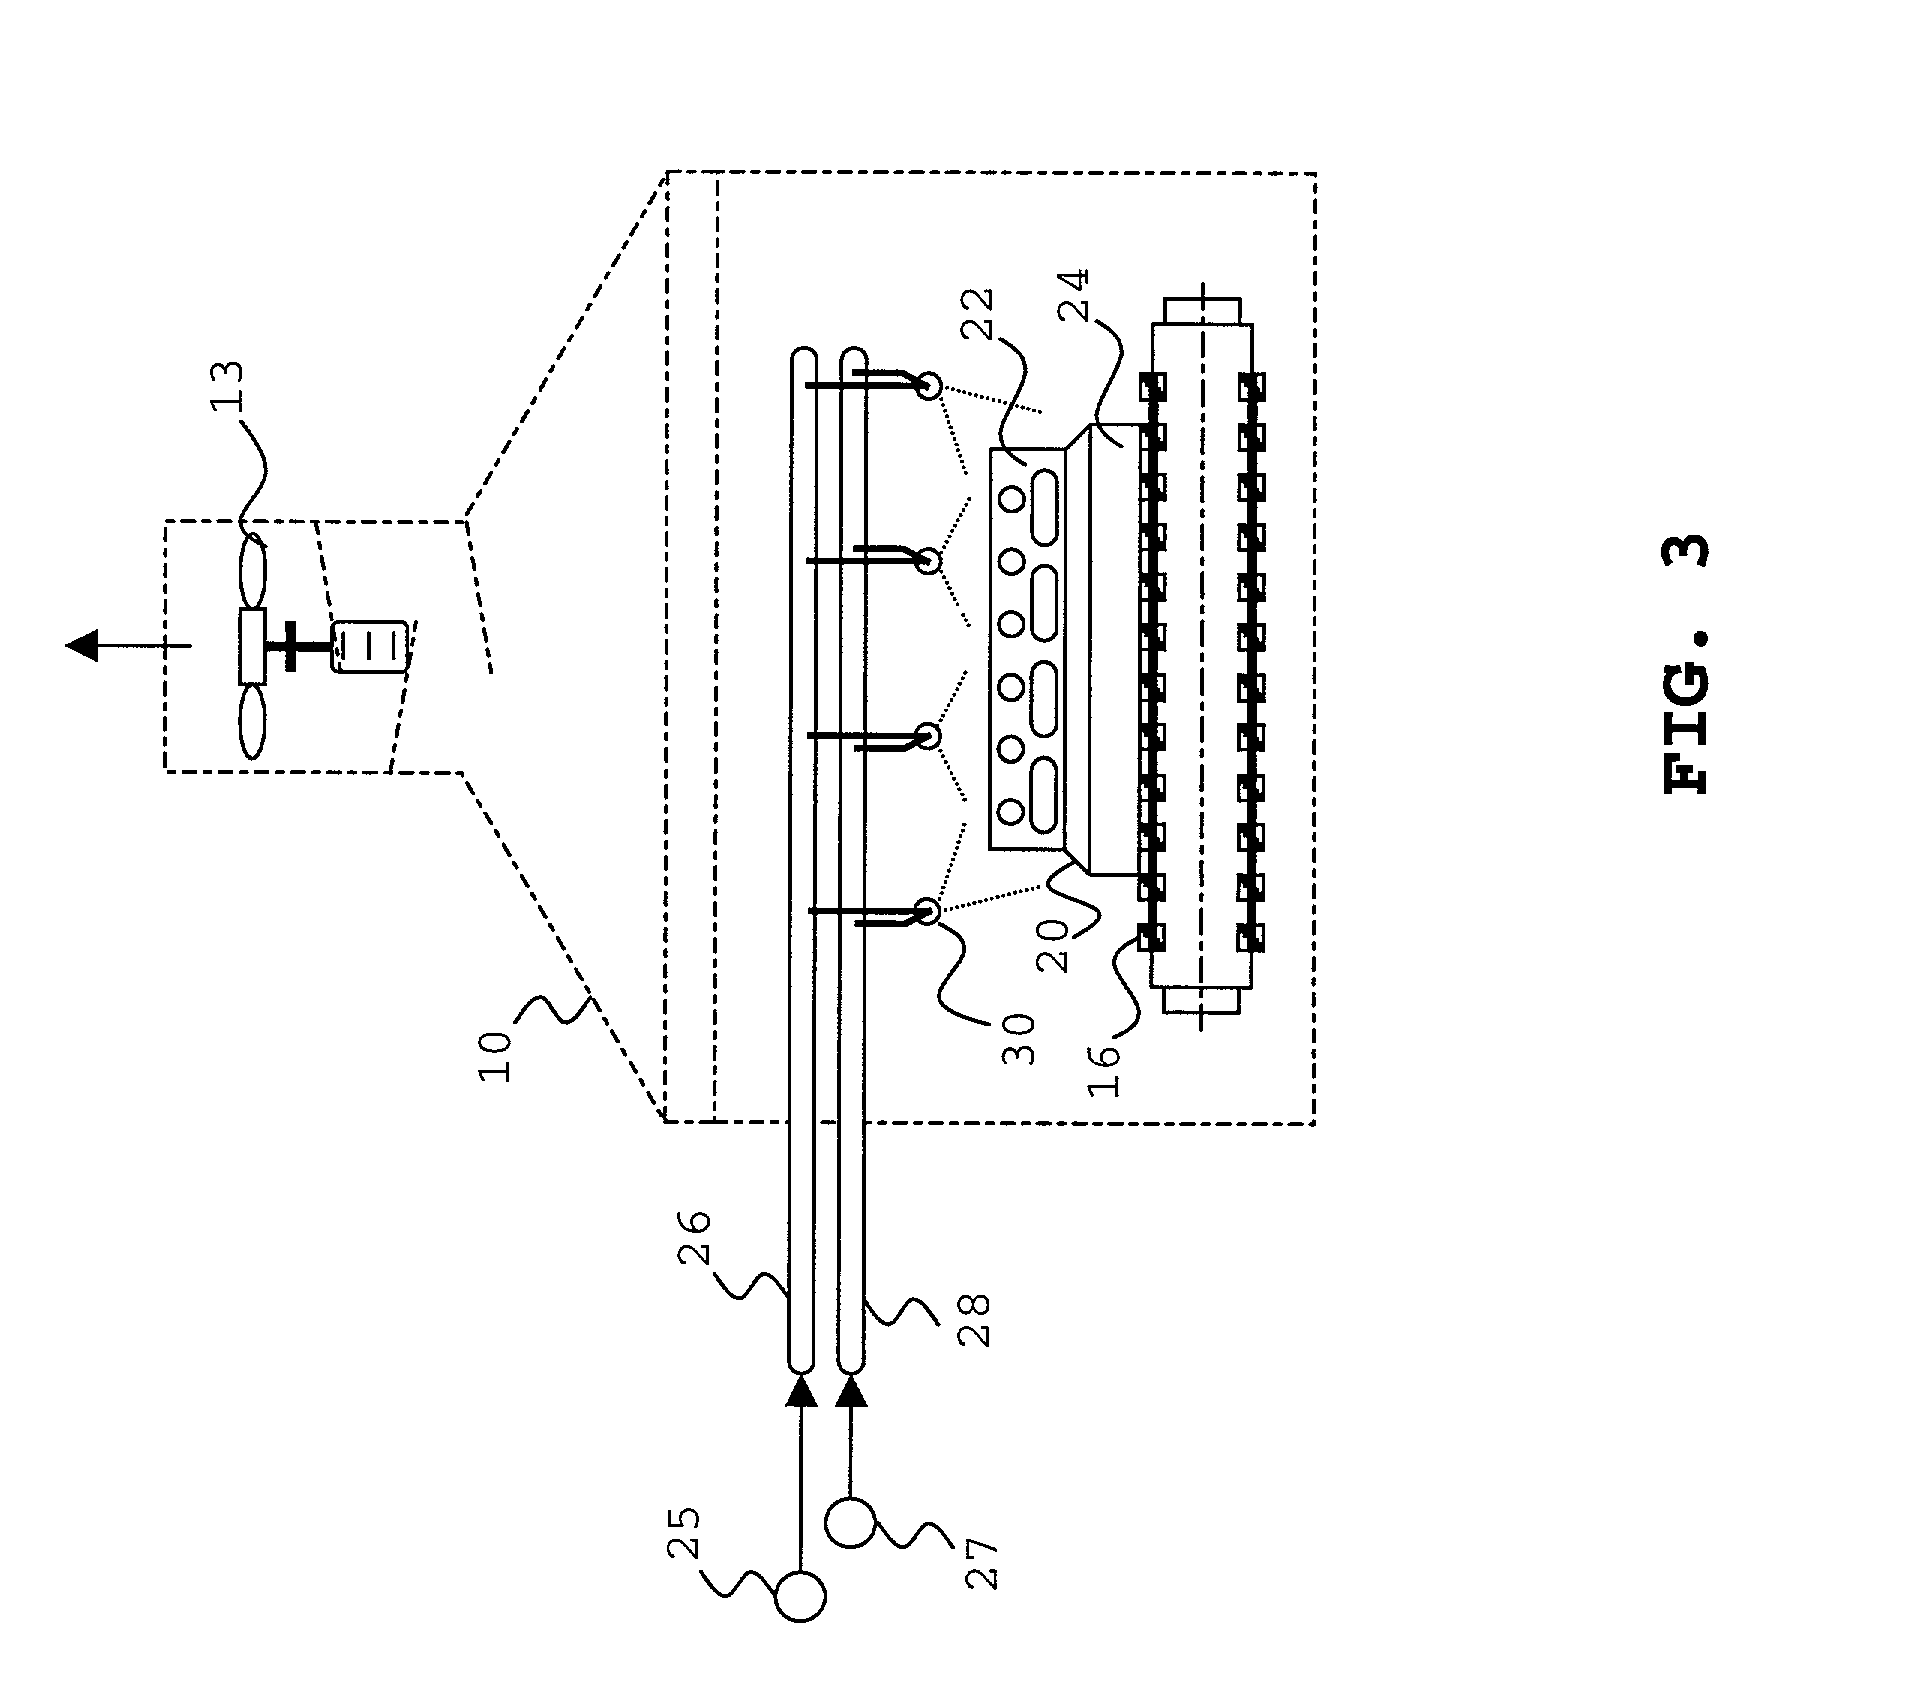 Apparatus for simplified production of heat treatable aluminum alloy castings with artificial self-aging